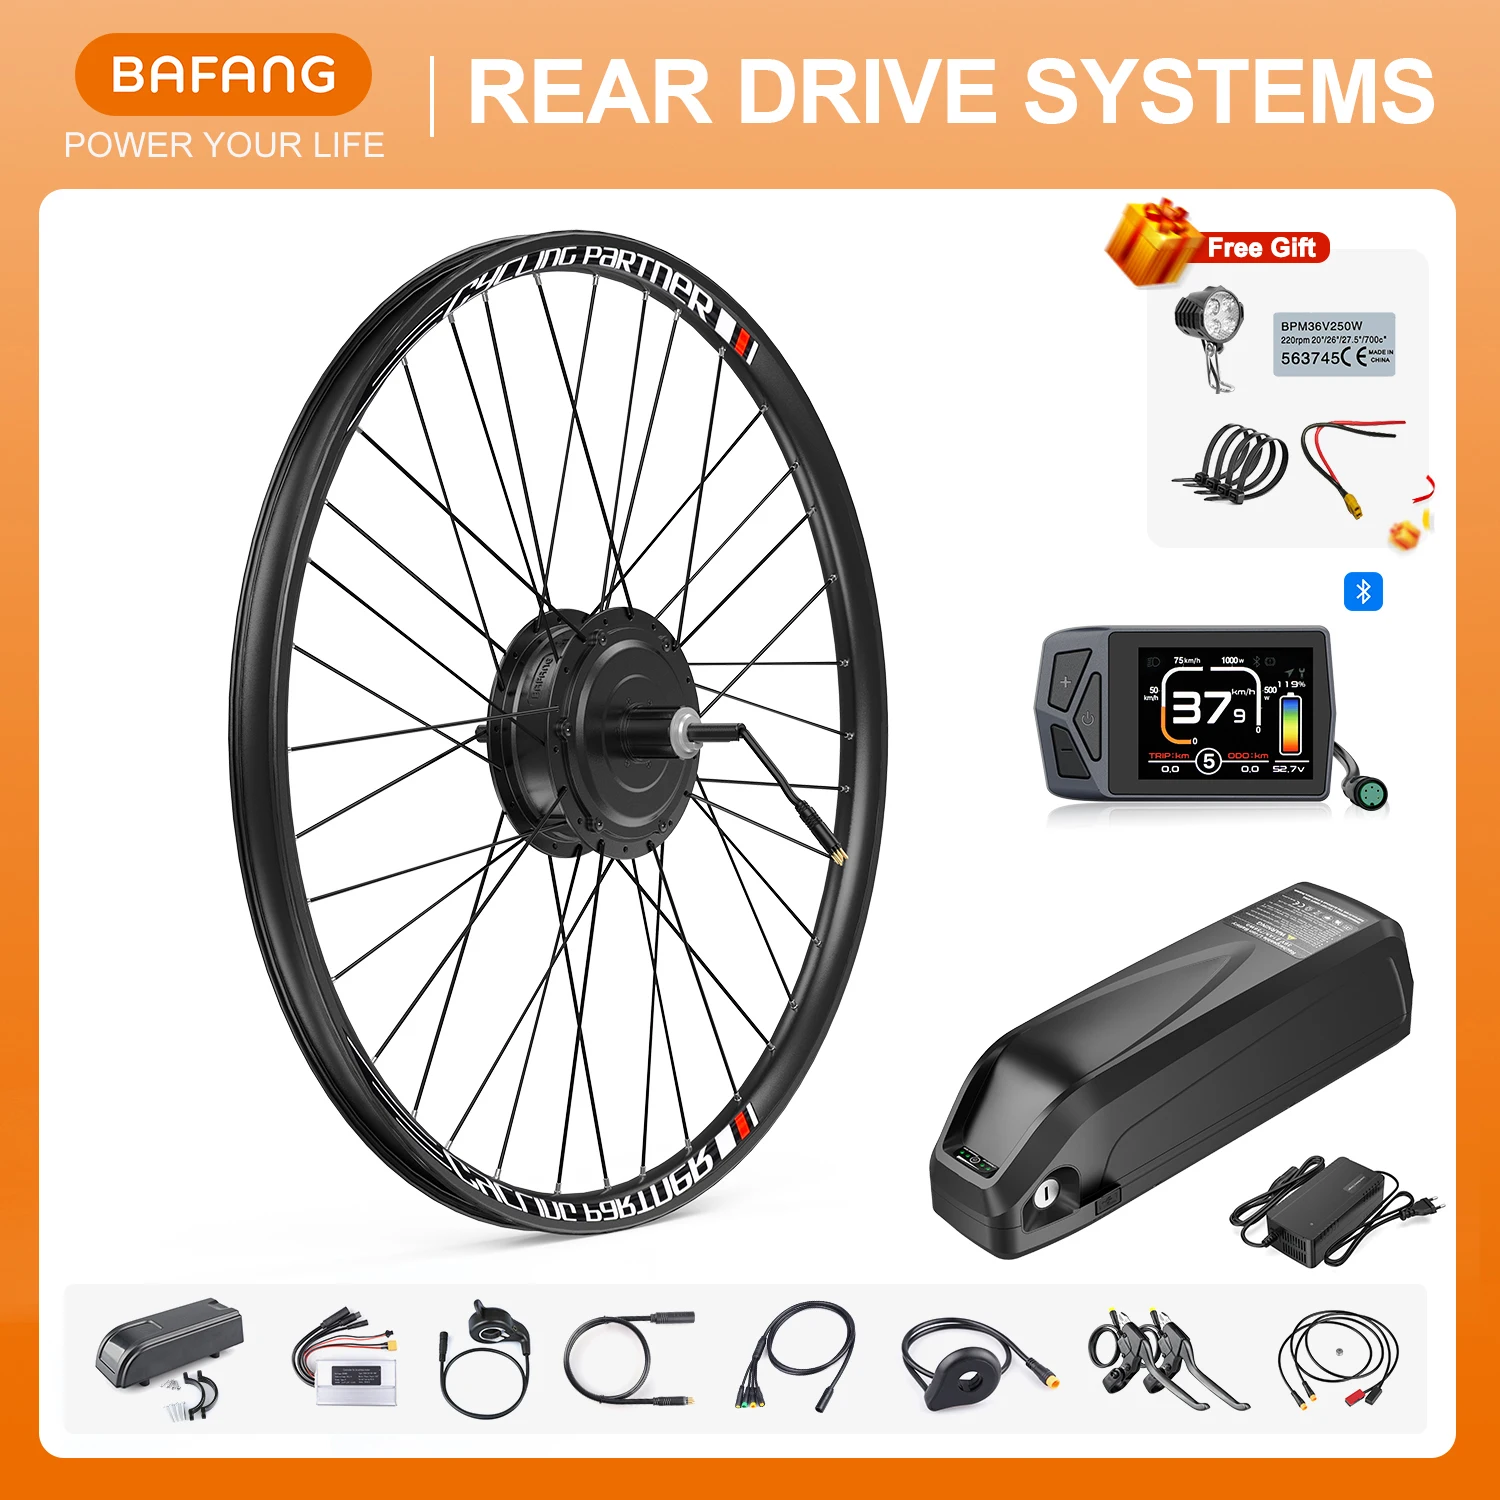 Bafang 750W 500W Wheel Hub Motor with Battery 48V 20Ah 17.5Ah Electric  Conversion Kit Front Rear Drive Bicycle Engine EBike Kit